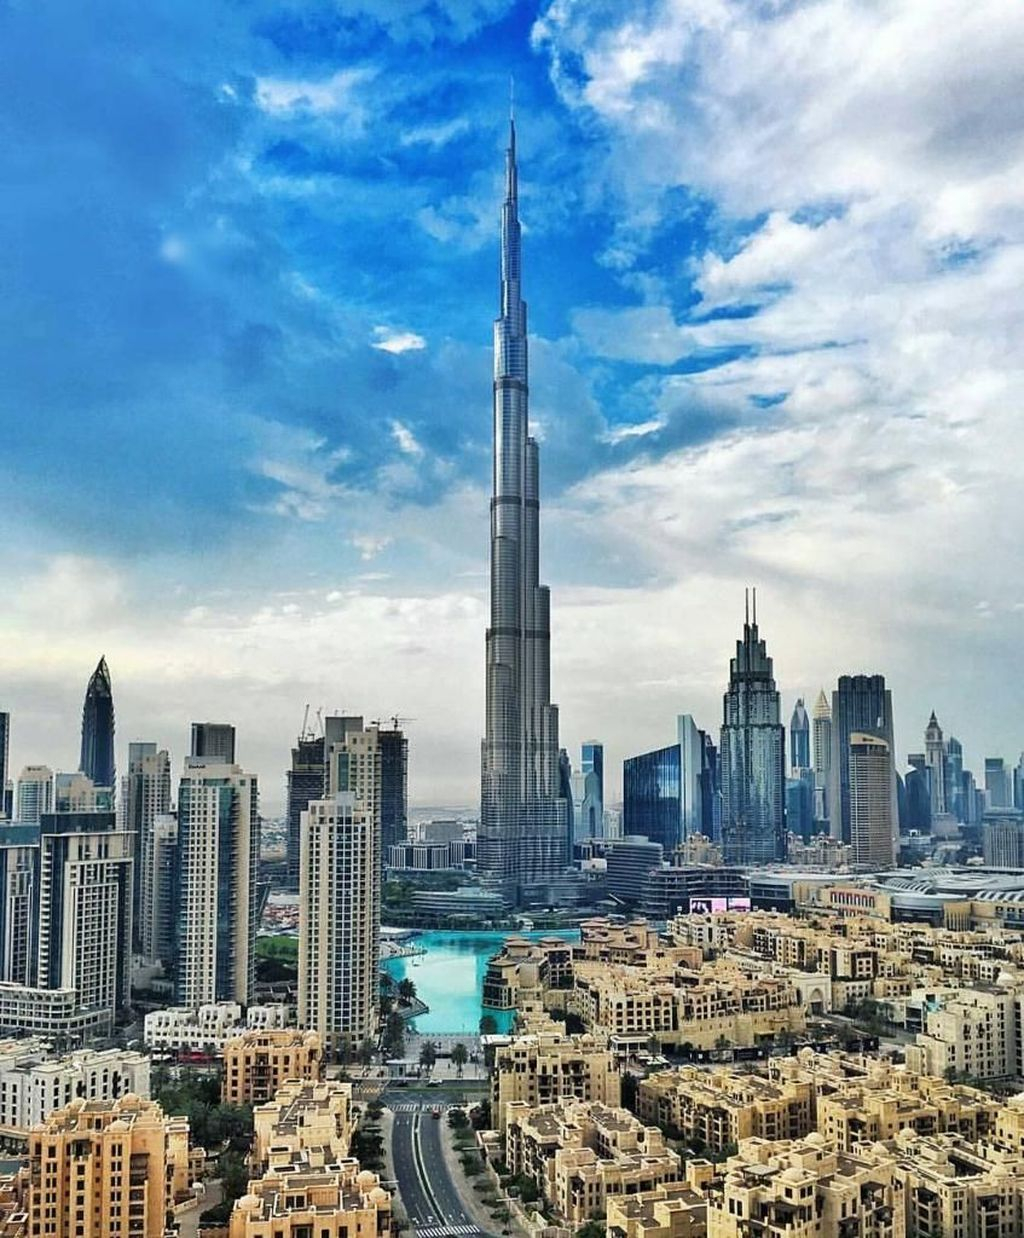 Awesome Photos Of Dubai To Make You Want To Visit It12